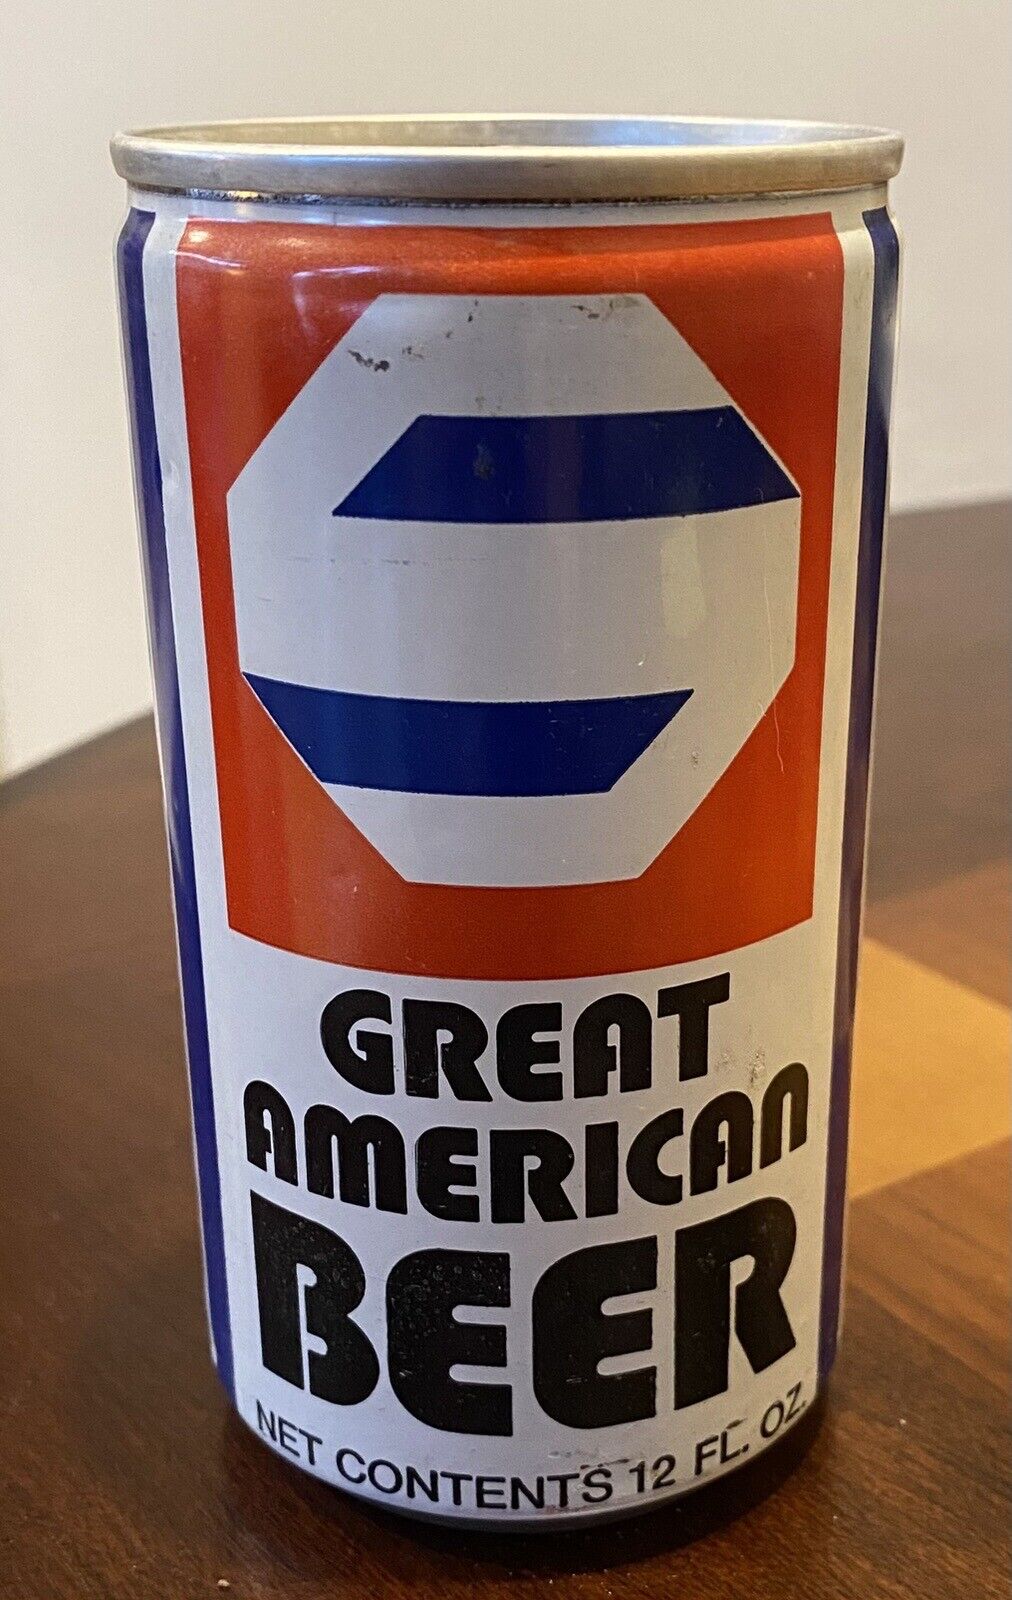 Great American Beer General Pull Tab Beer Can Bottom Opened Empty